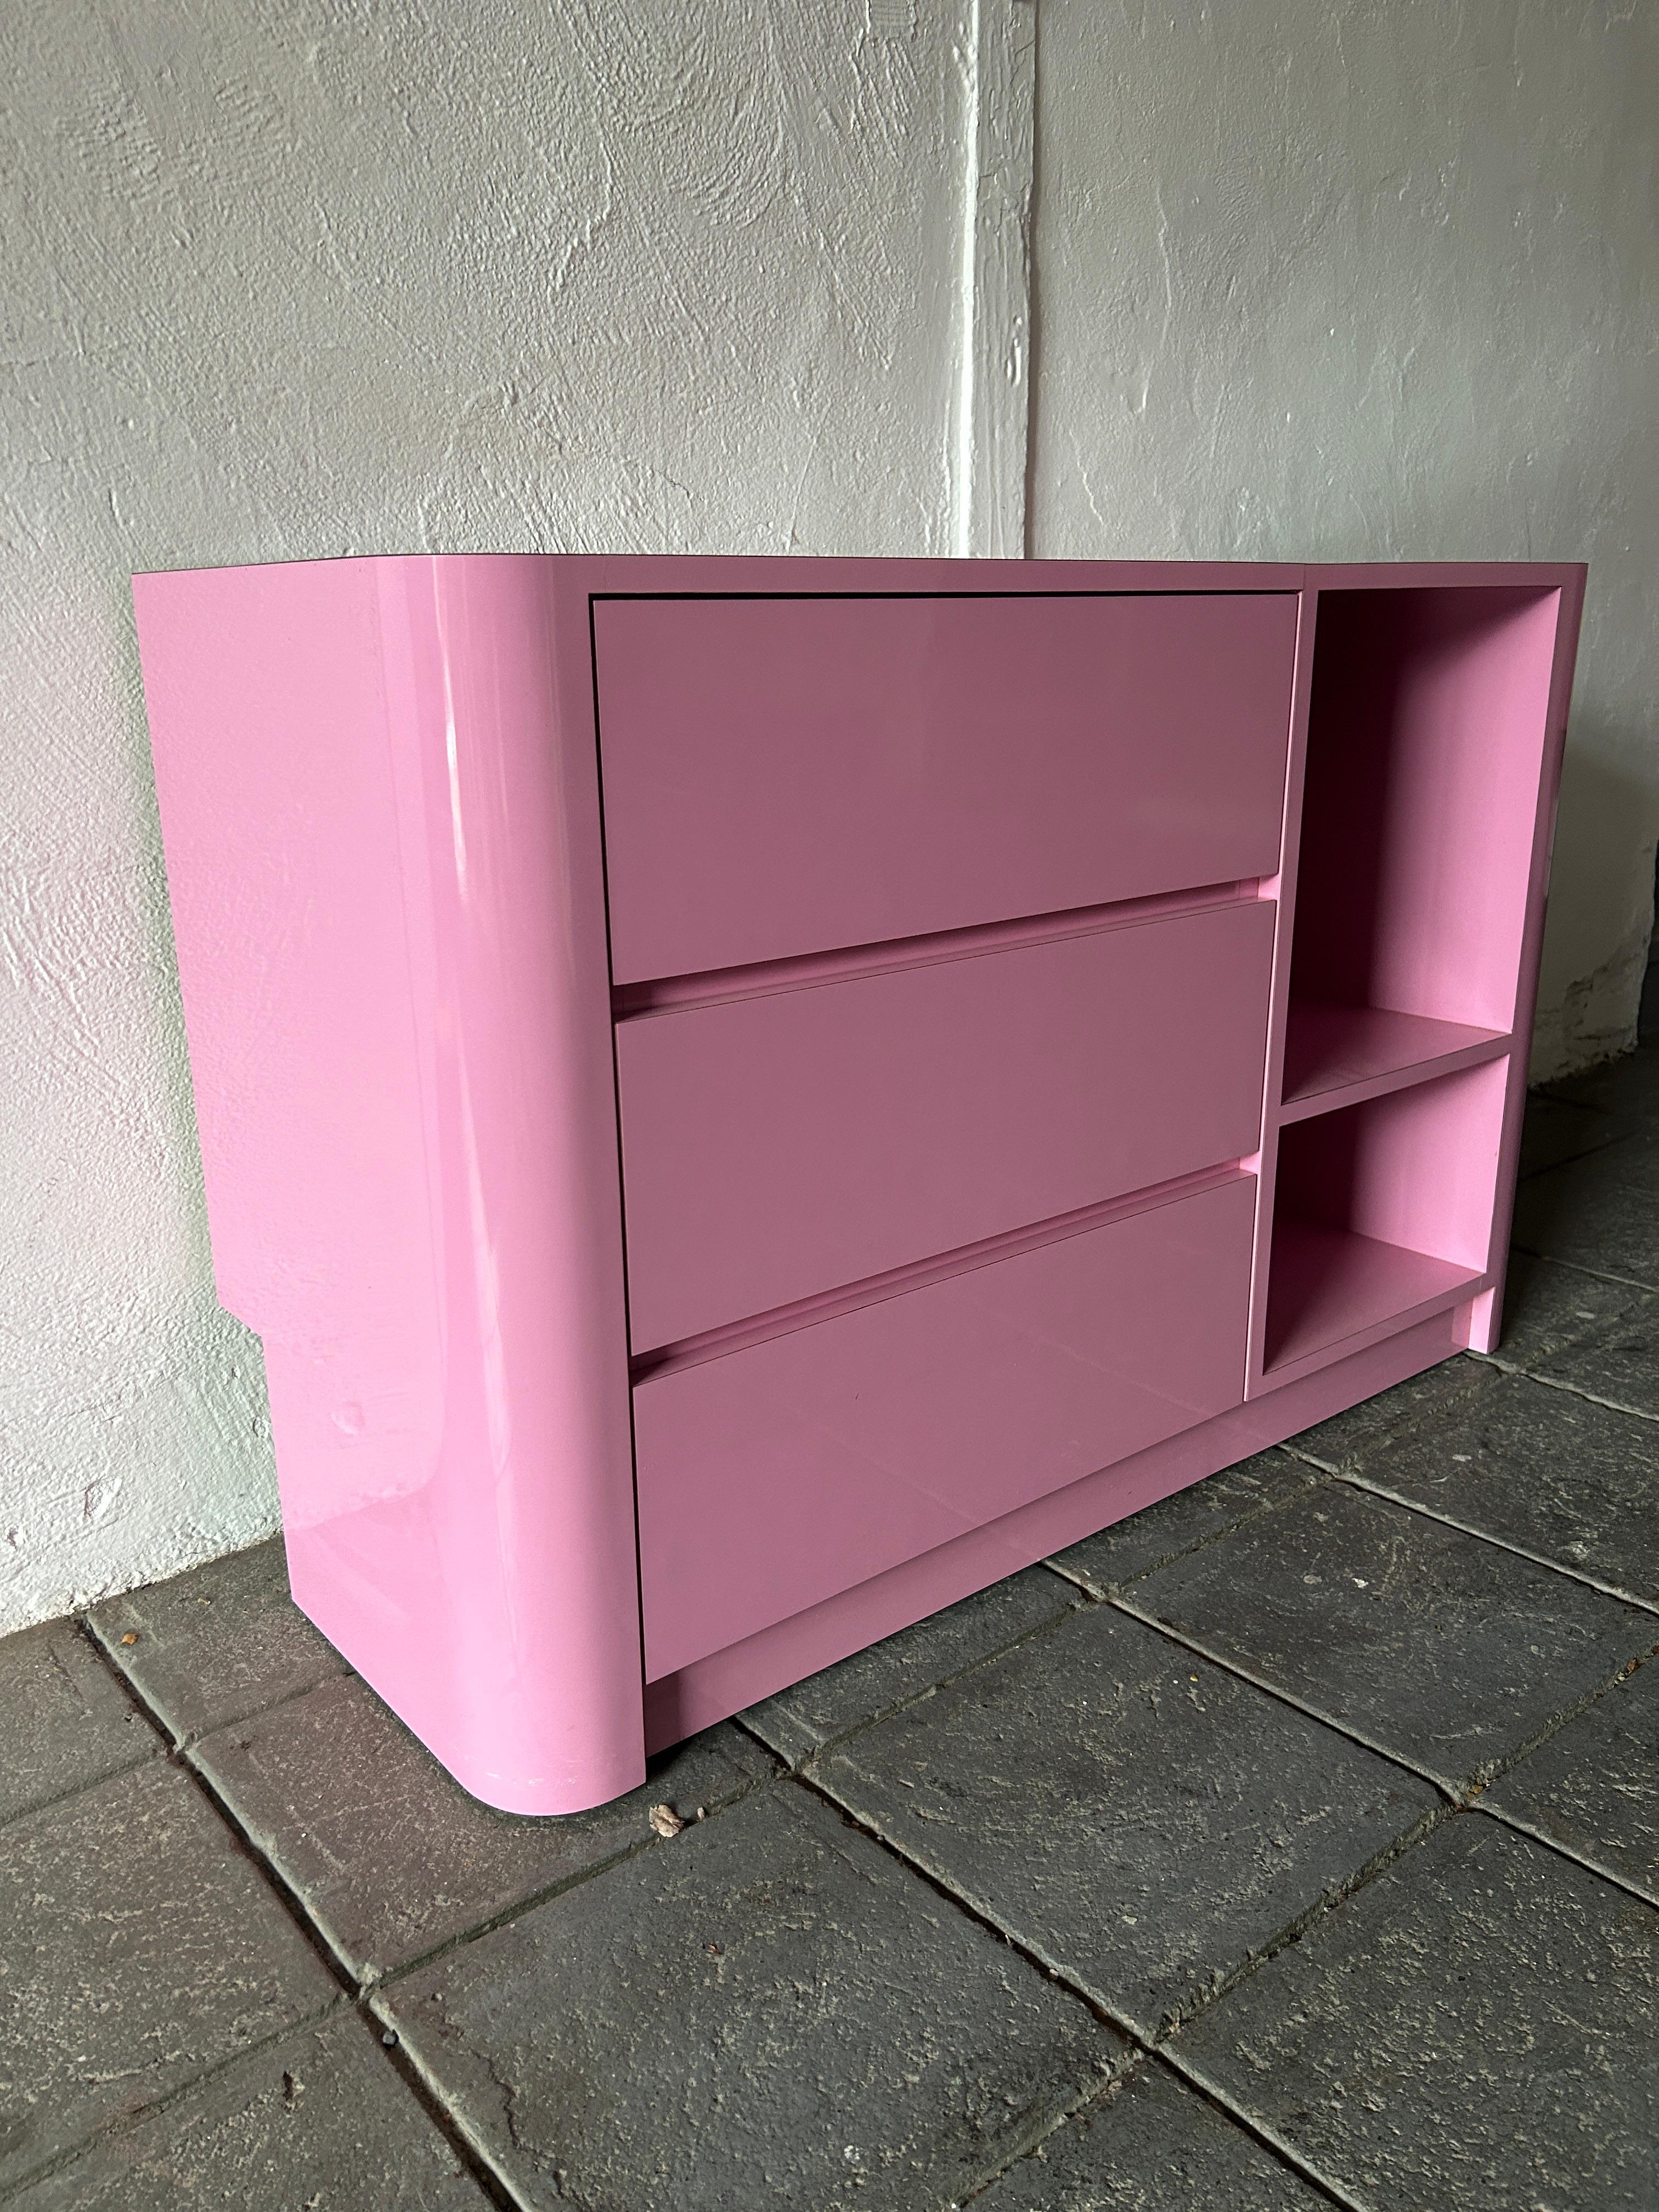 Beautiful post modern custom made bubblegum pink gloss laminate 3 drawer dresser or credenza circa 1980. Very clean inside and out almost like new. Look at photos. There is (3) drawers on the left and (2) cubby shelves on the right. Great for home,